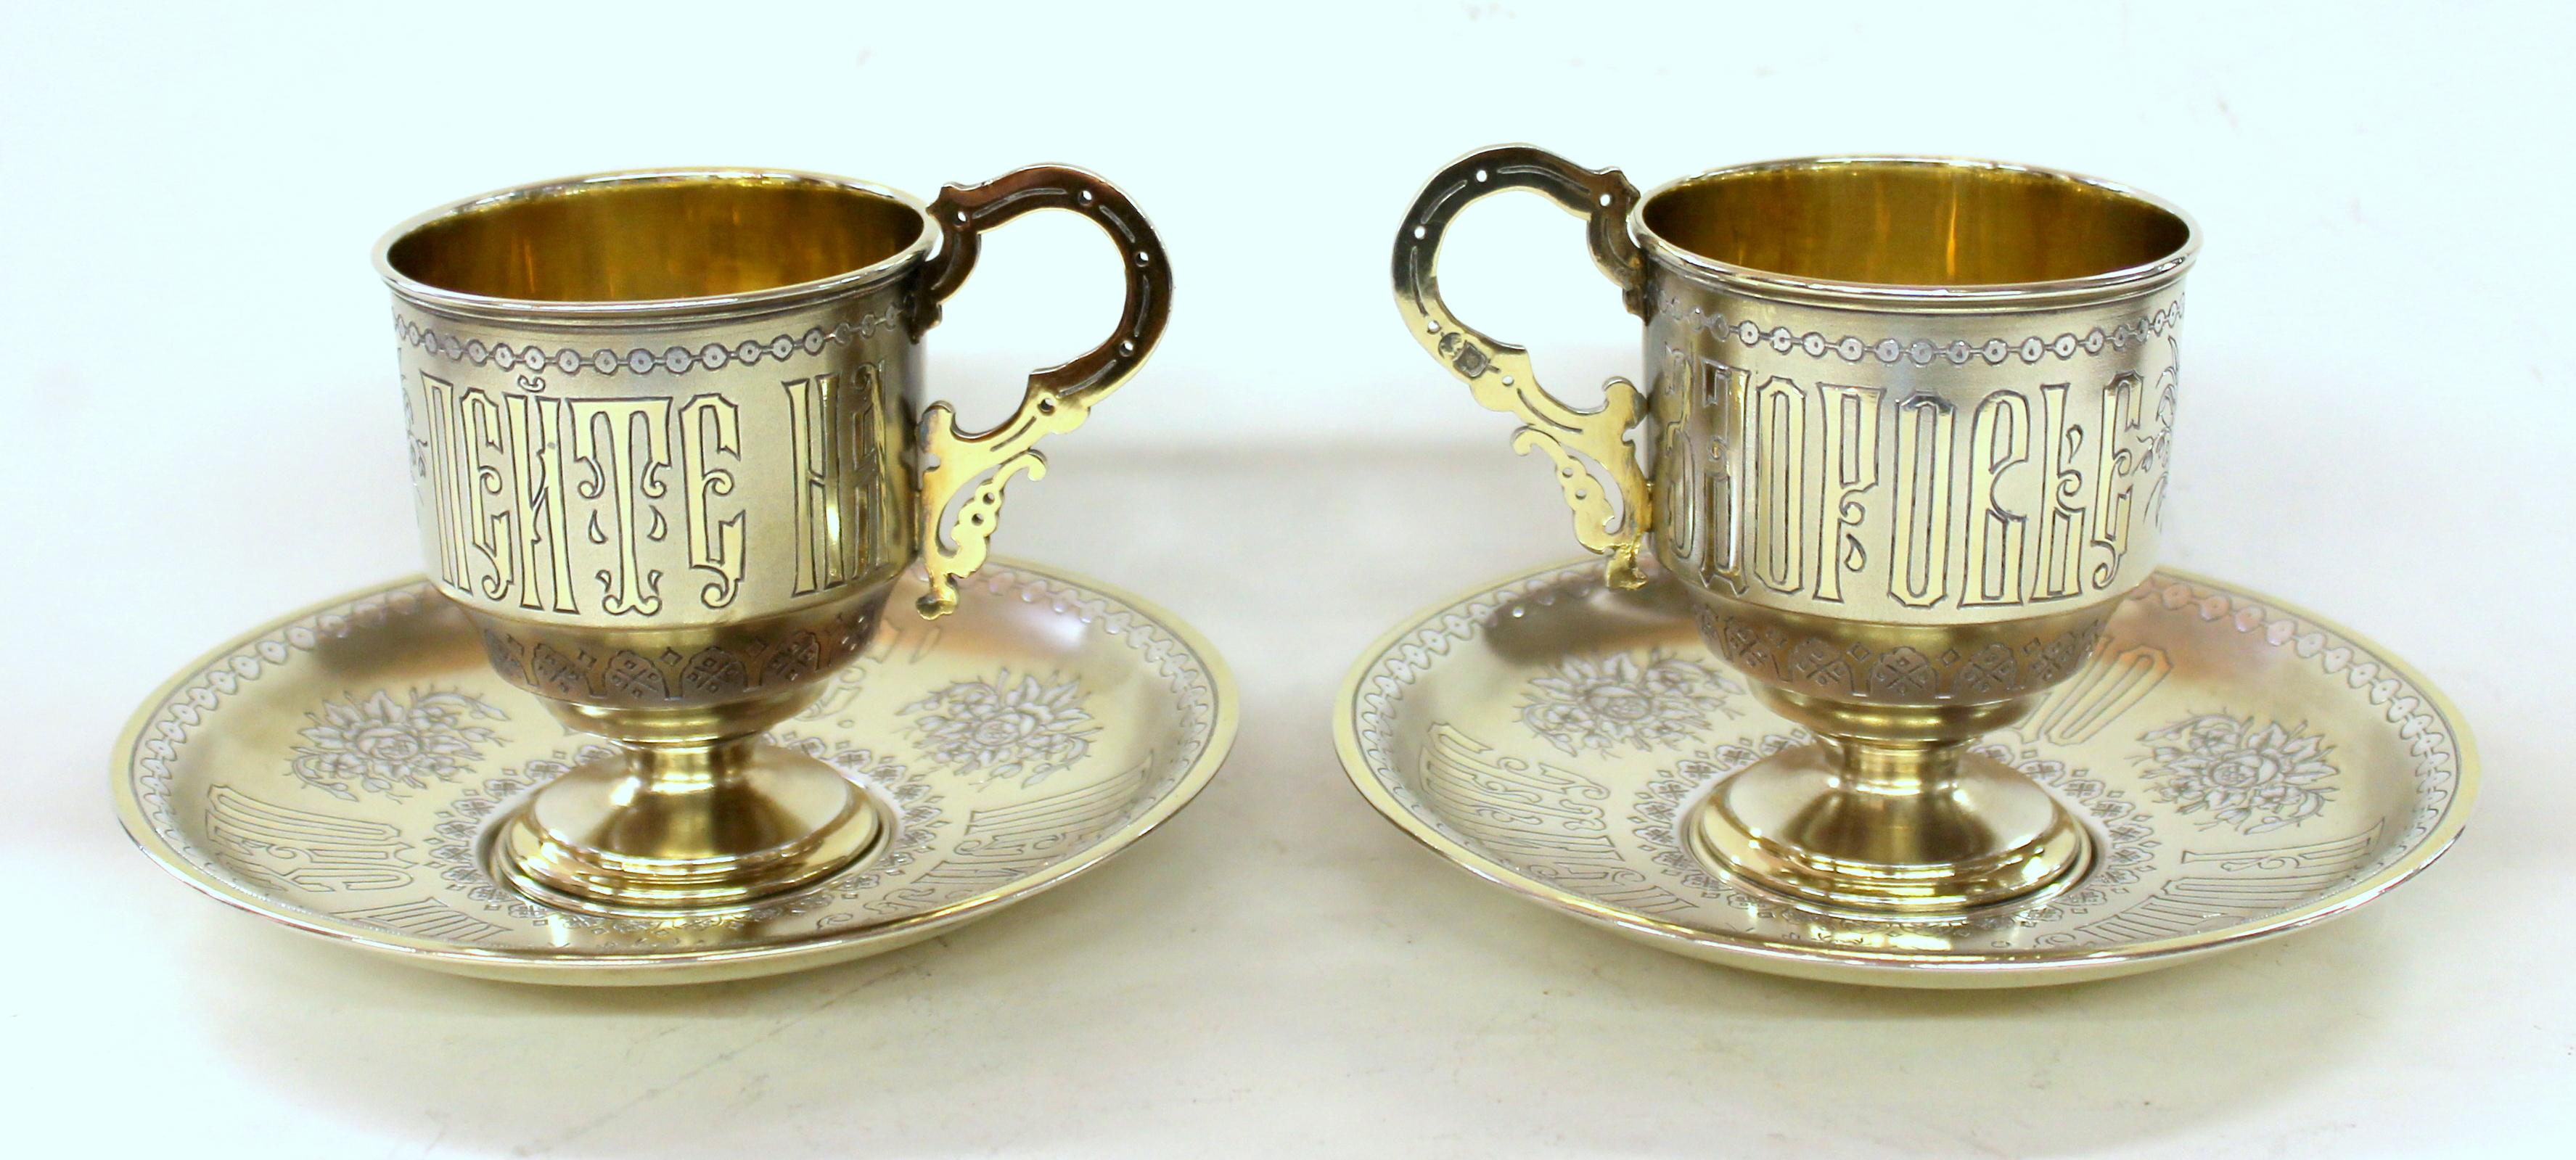 Pair of extraordinary quality antique Russian .875 fine silver vermeil hand engraved rare toasting cups and saucers.

Gilt 